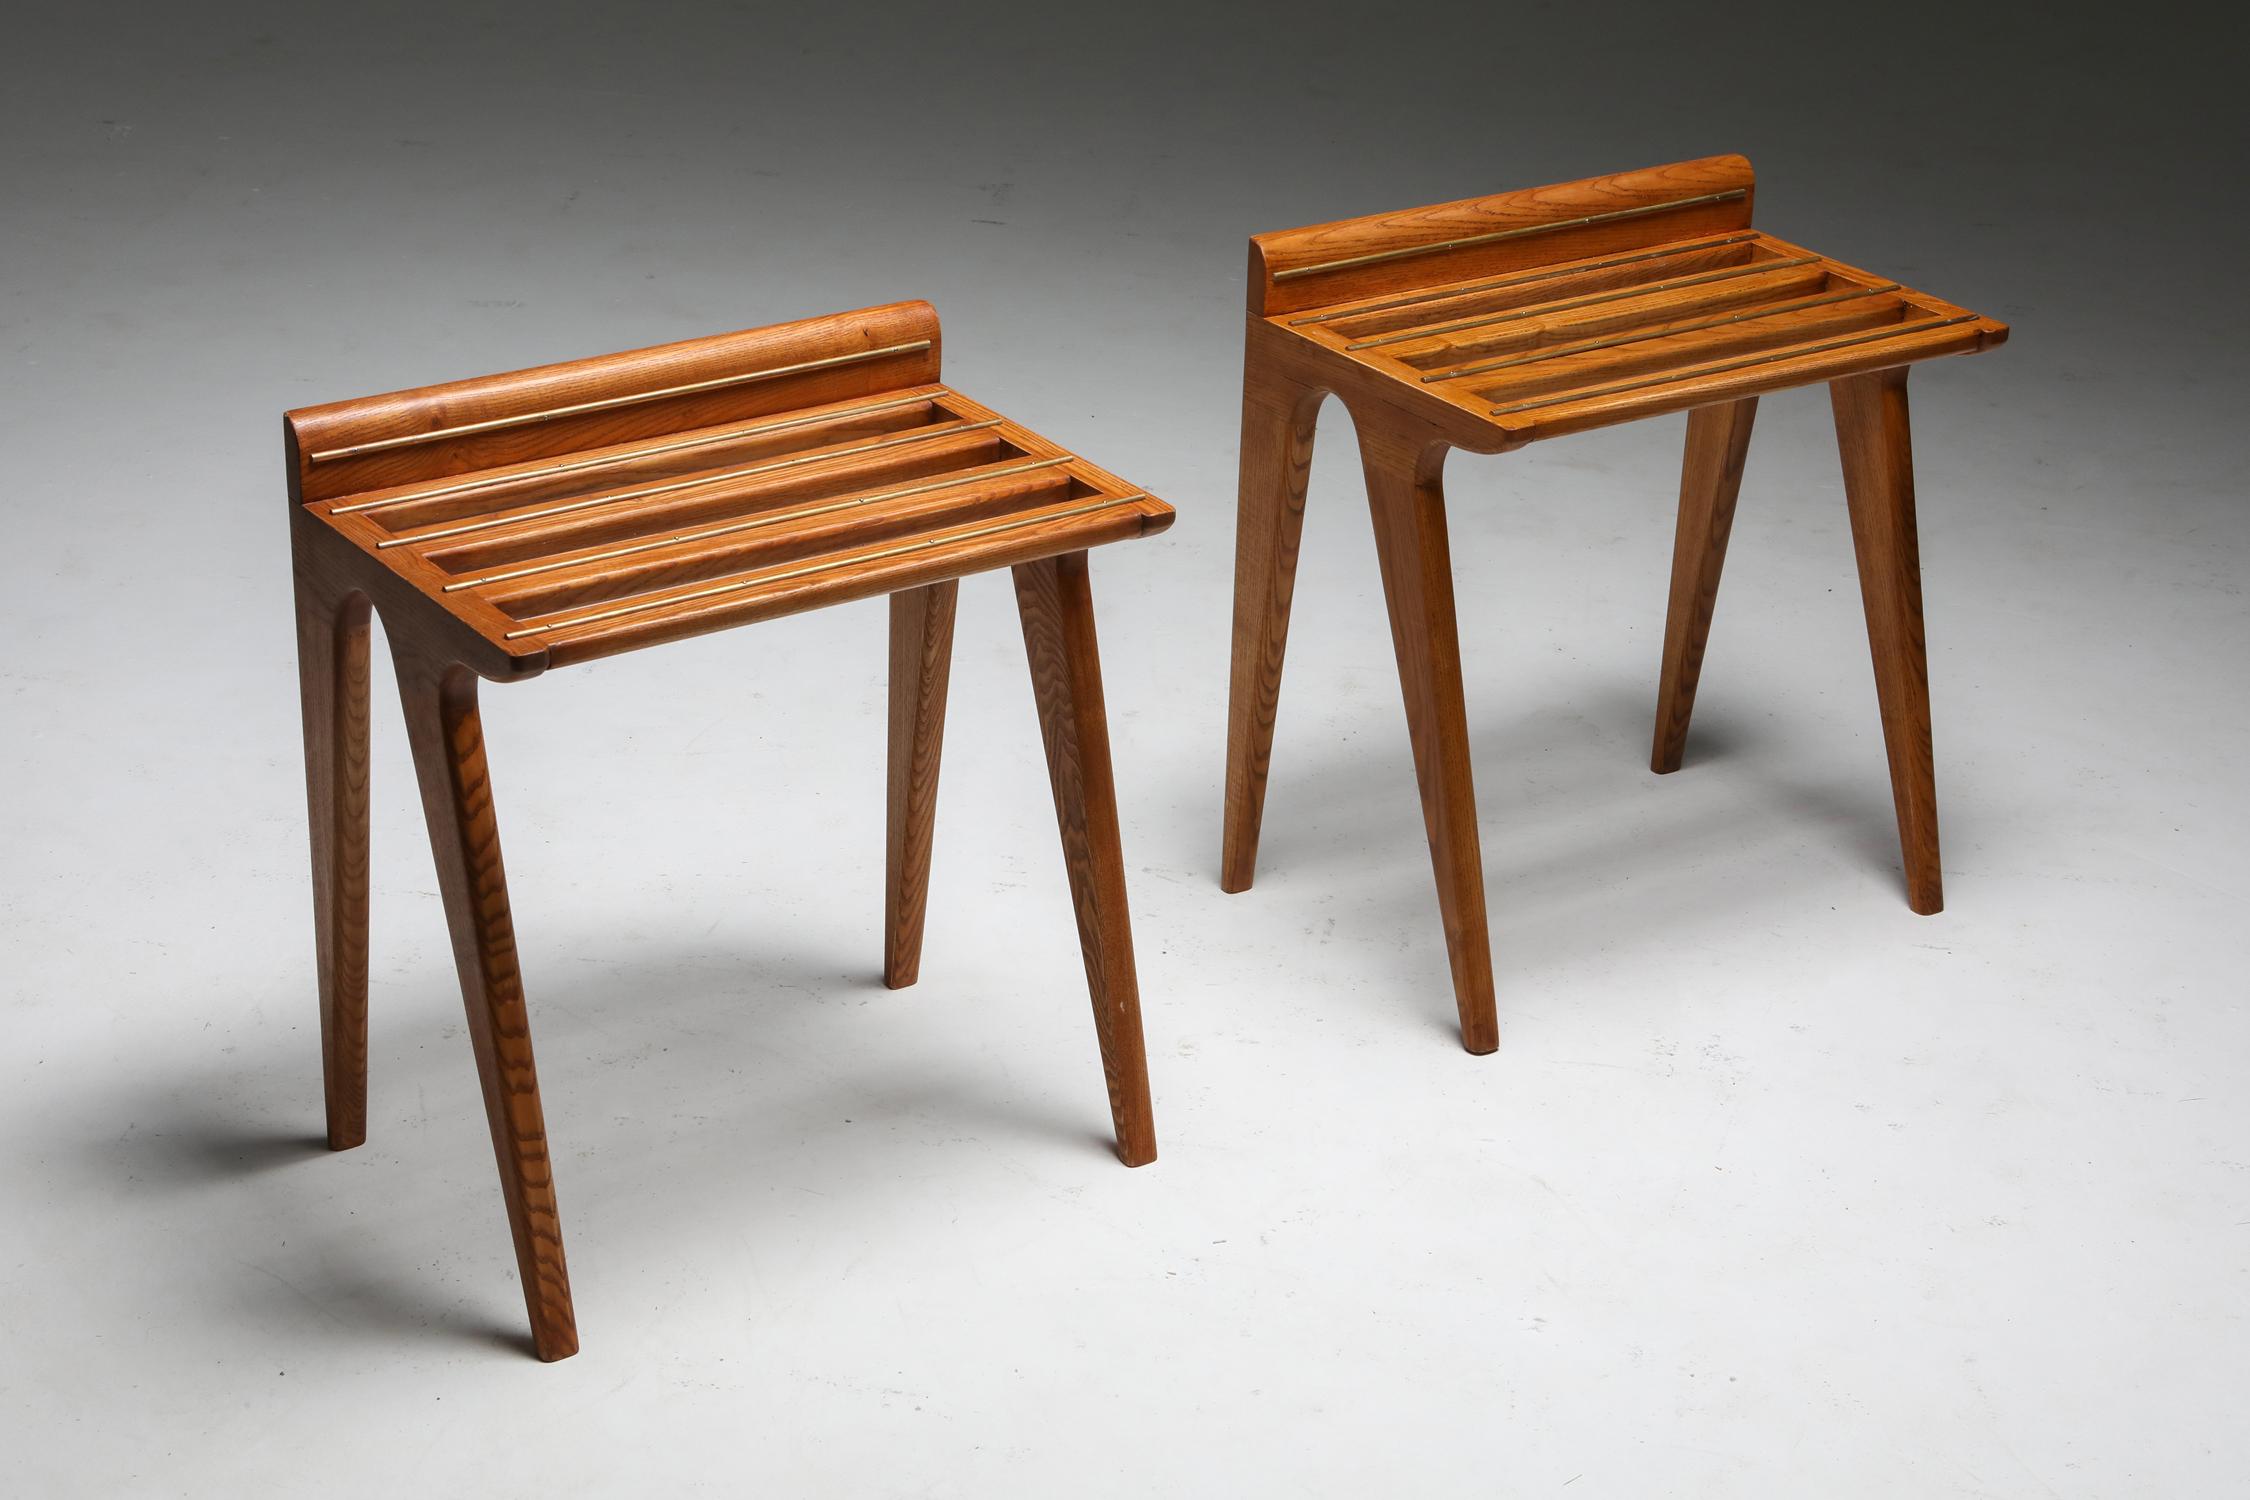 Console tables in oak and brass, style of Gio Ponti, circa 1958

Rare set of suitcase holders
Designed for Hotel Parco in Sorrento

Gio Ponti (1891-1979) was trained as an architect but was also a poet, a painter, a designer of exhibitions, glass,